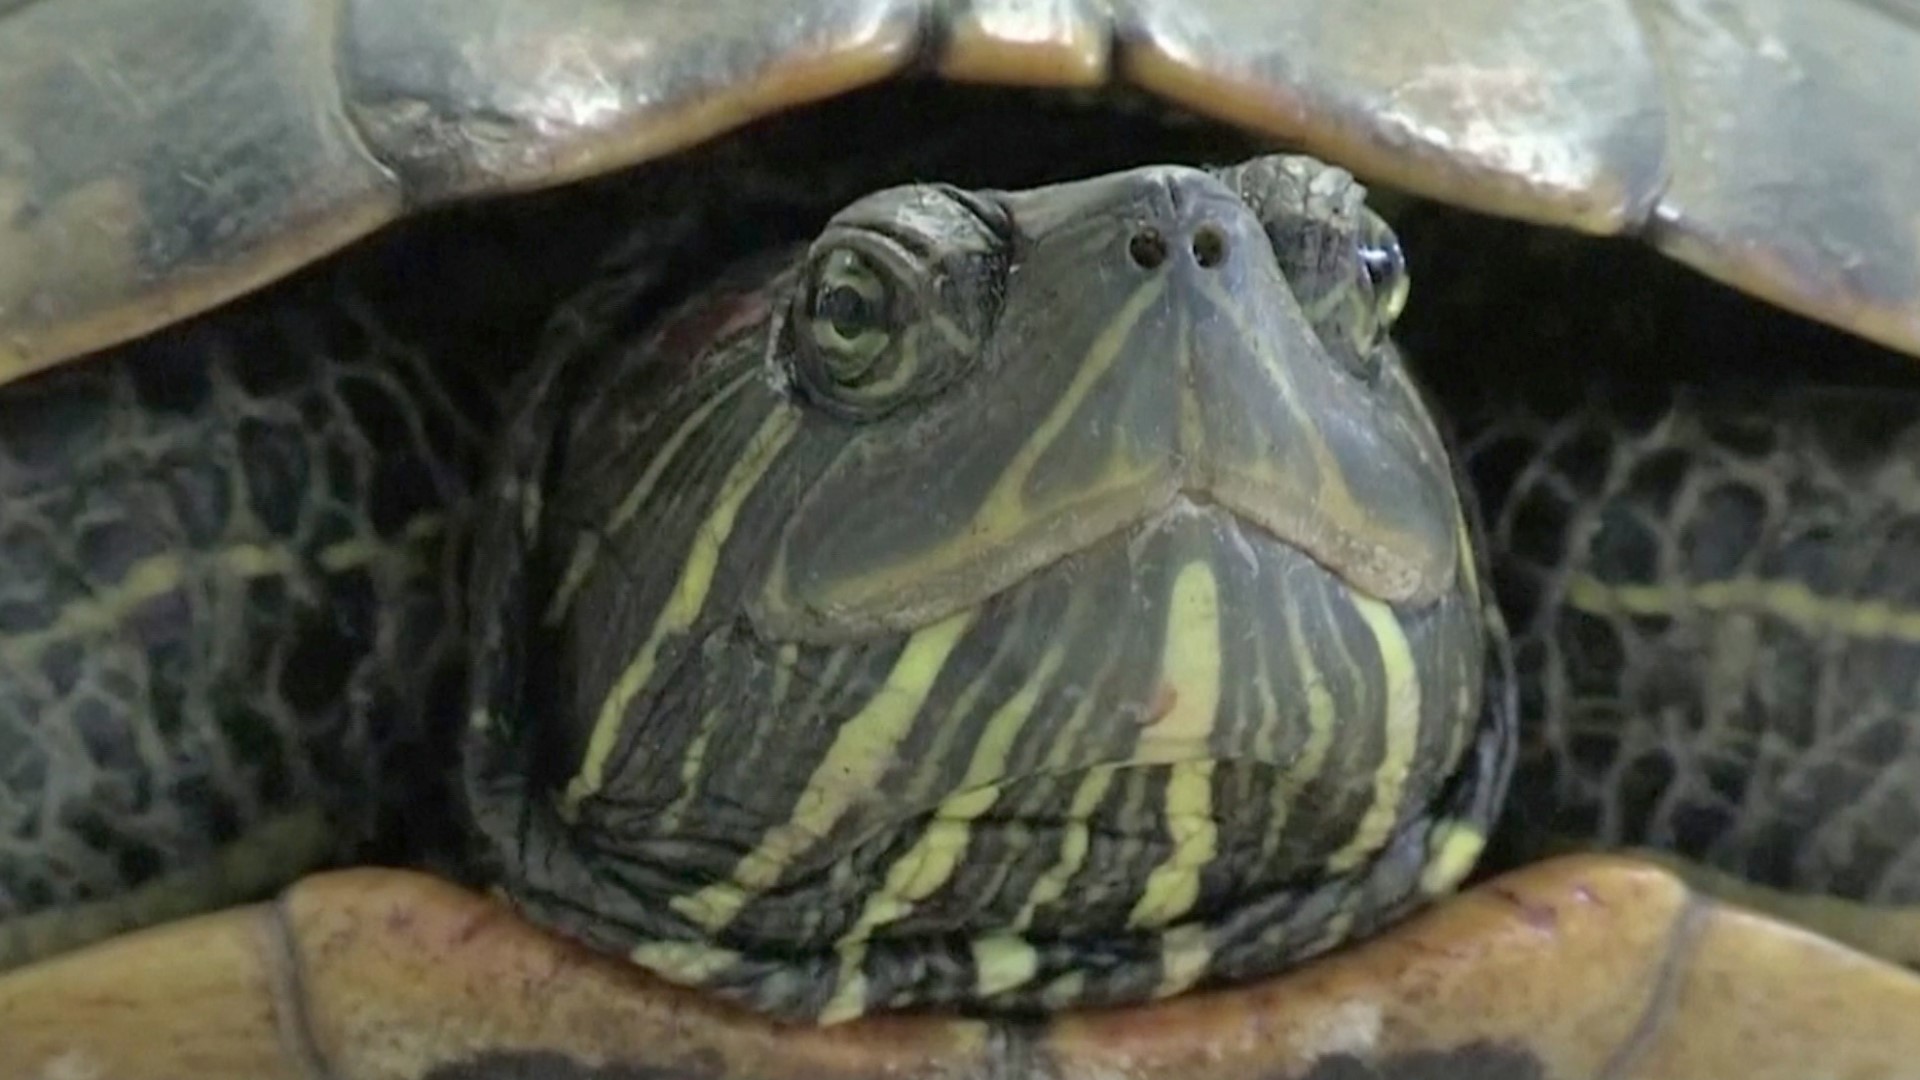 Flight delays are very common, but the people at Japan's Narita airport experienced an uncommon reason for their delays: a turtle. Buzz60's Maria Mercedes Galuppo has the story.